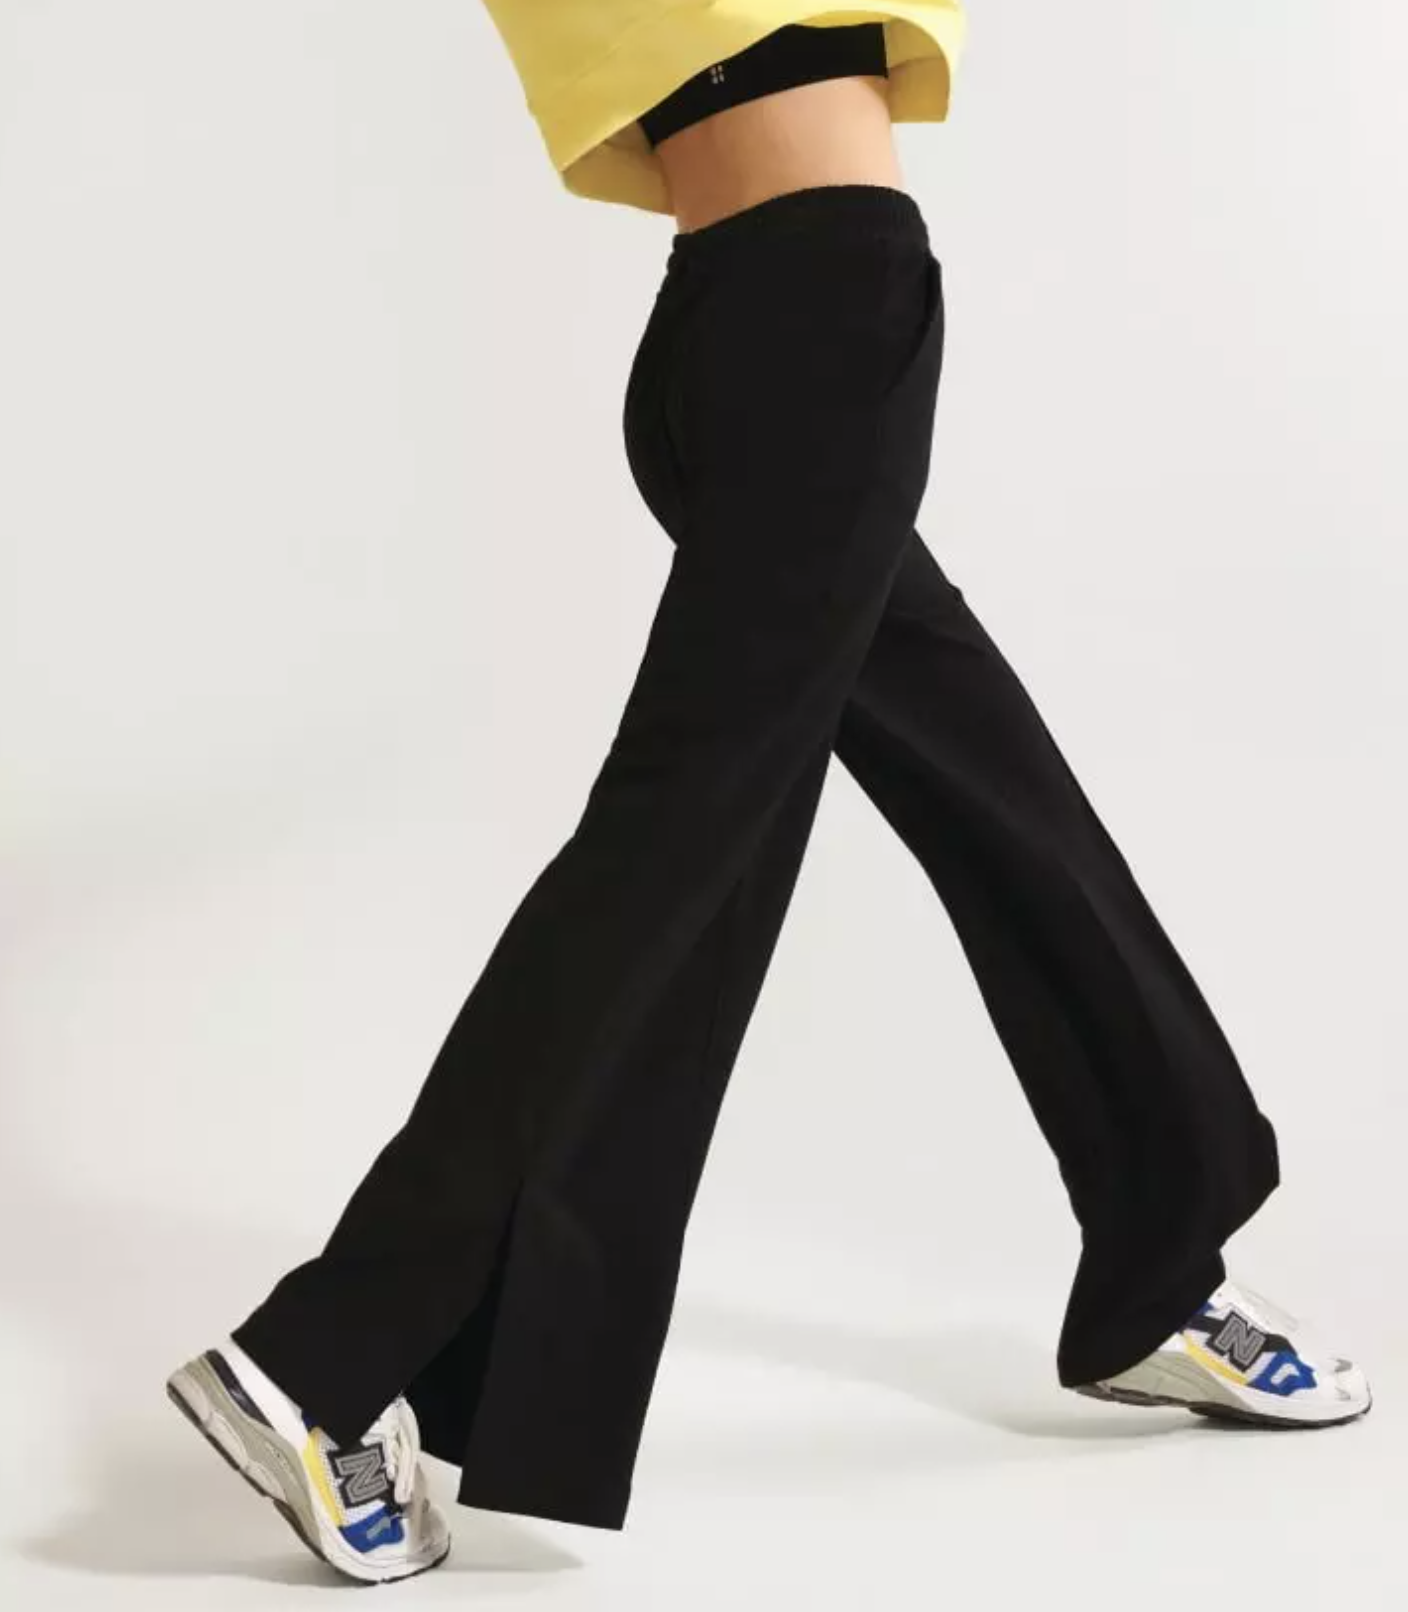 Caged Sexy Cut-Out Bell Bottom Dance Pants | MYZIJI DANCE FITNESS